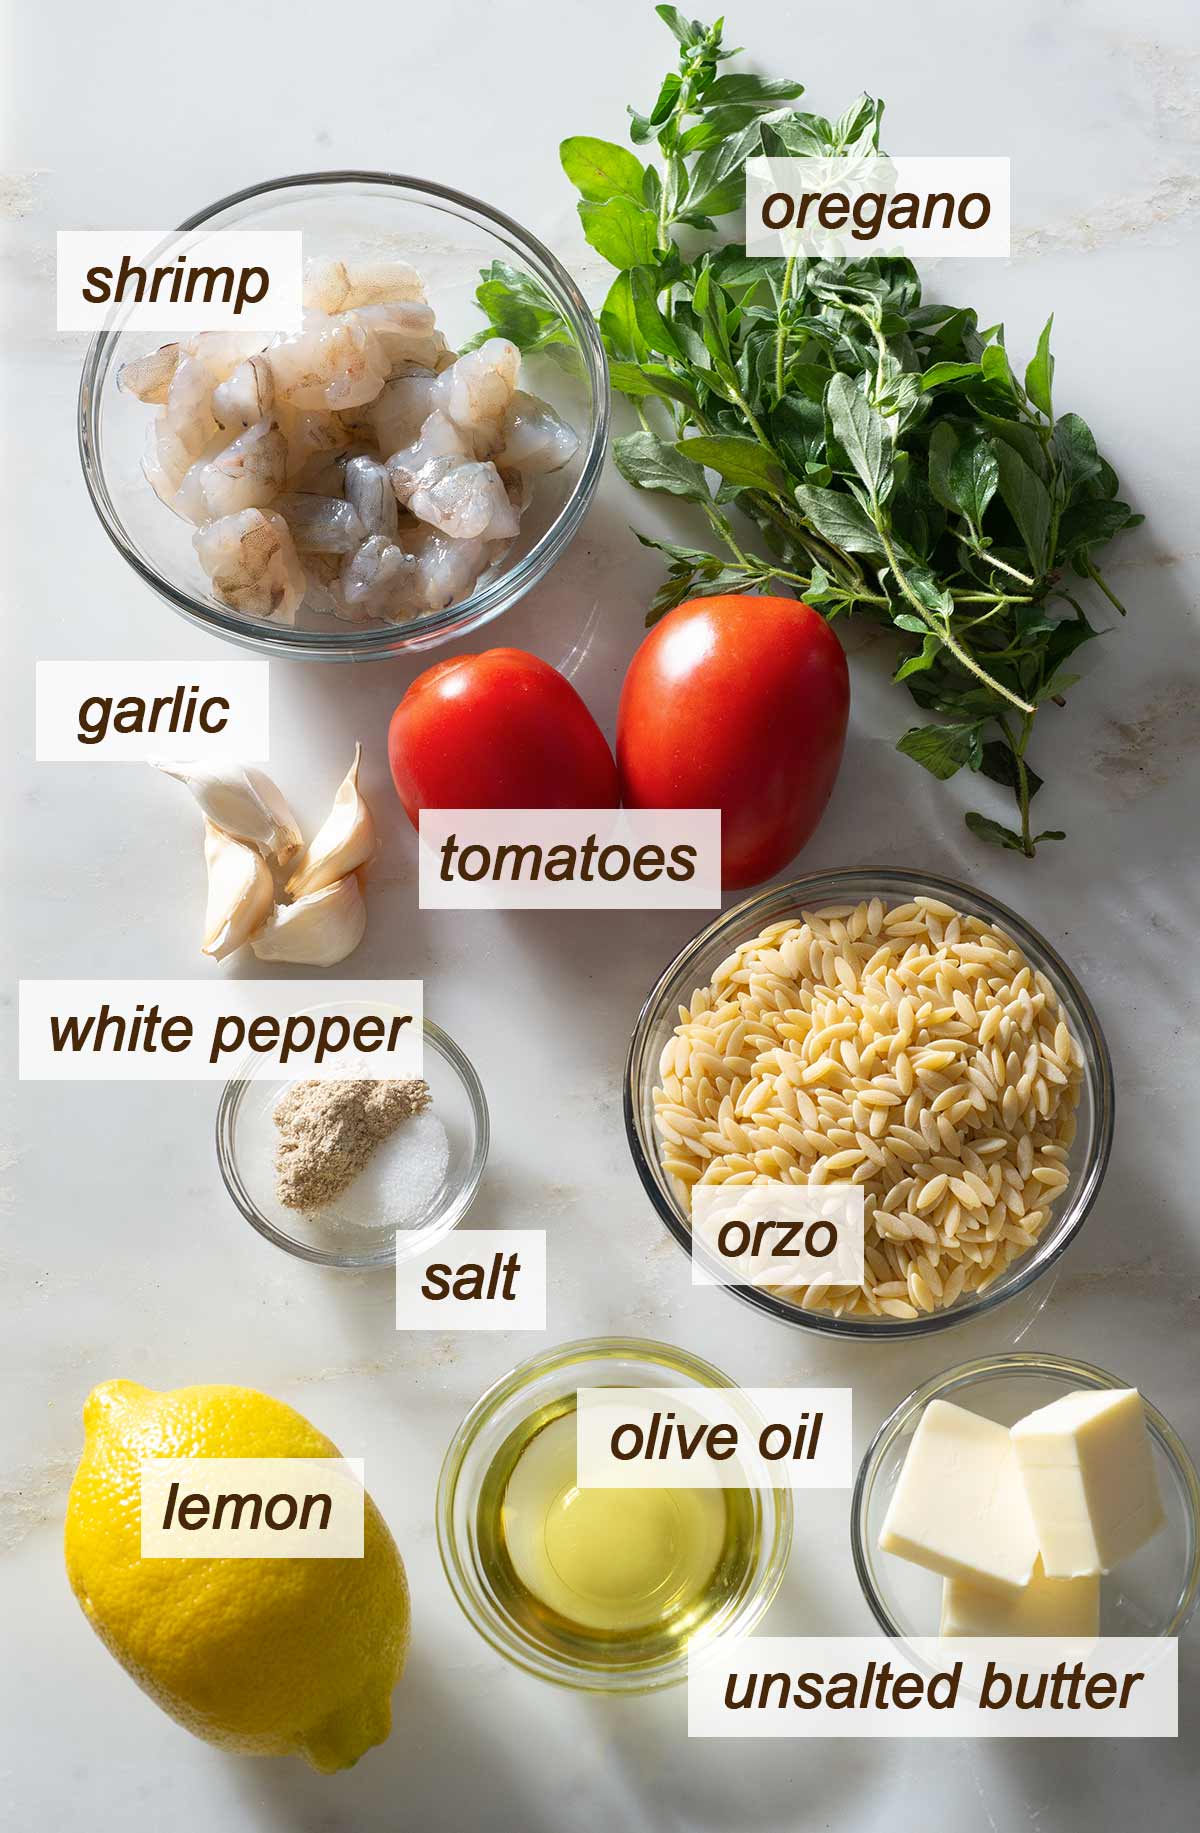 Orzo shrimp scampi ingredients on a kitchen counter.